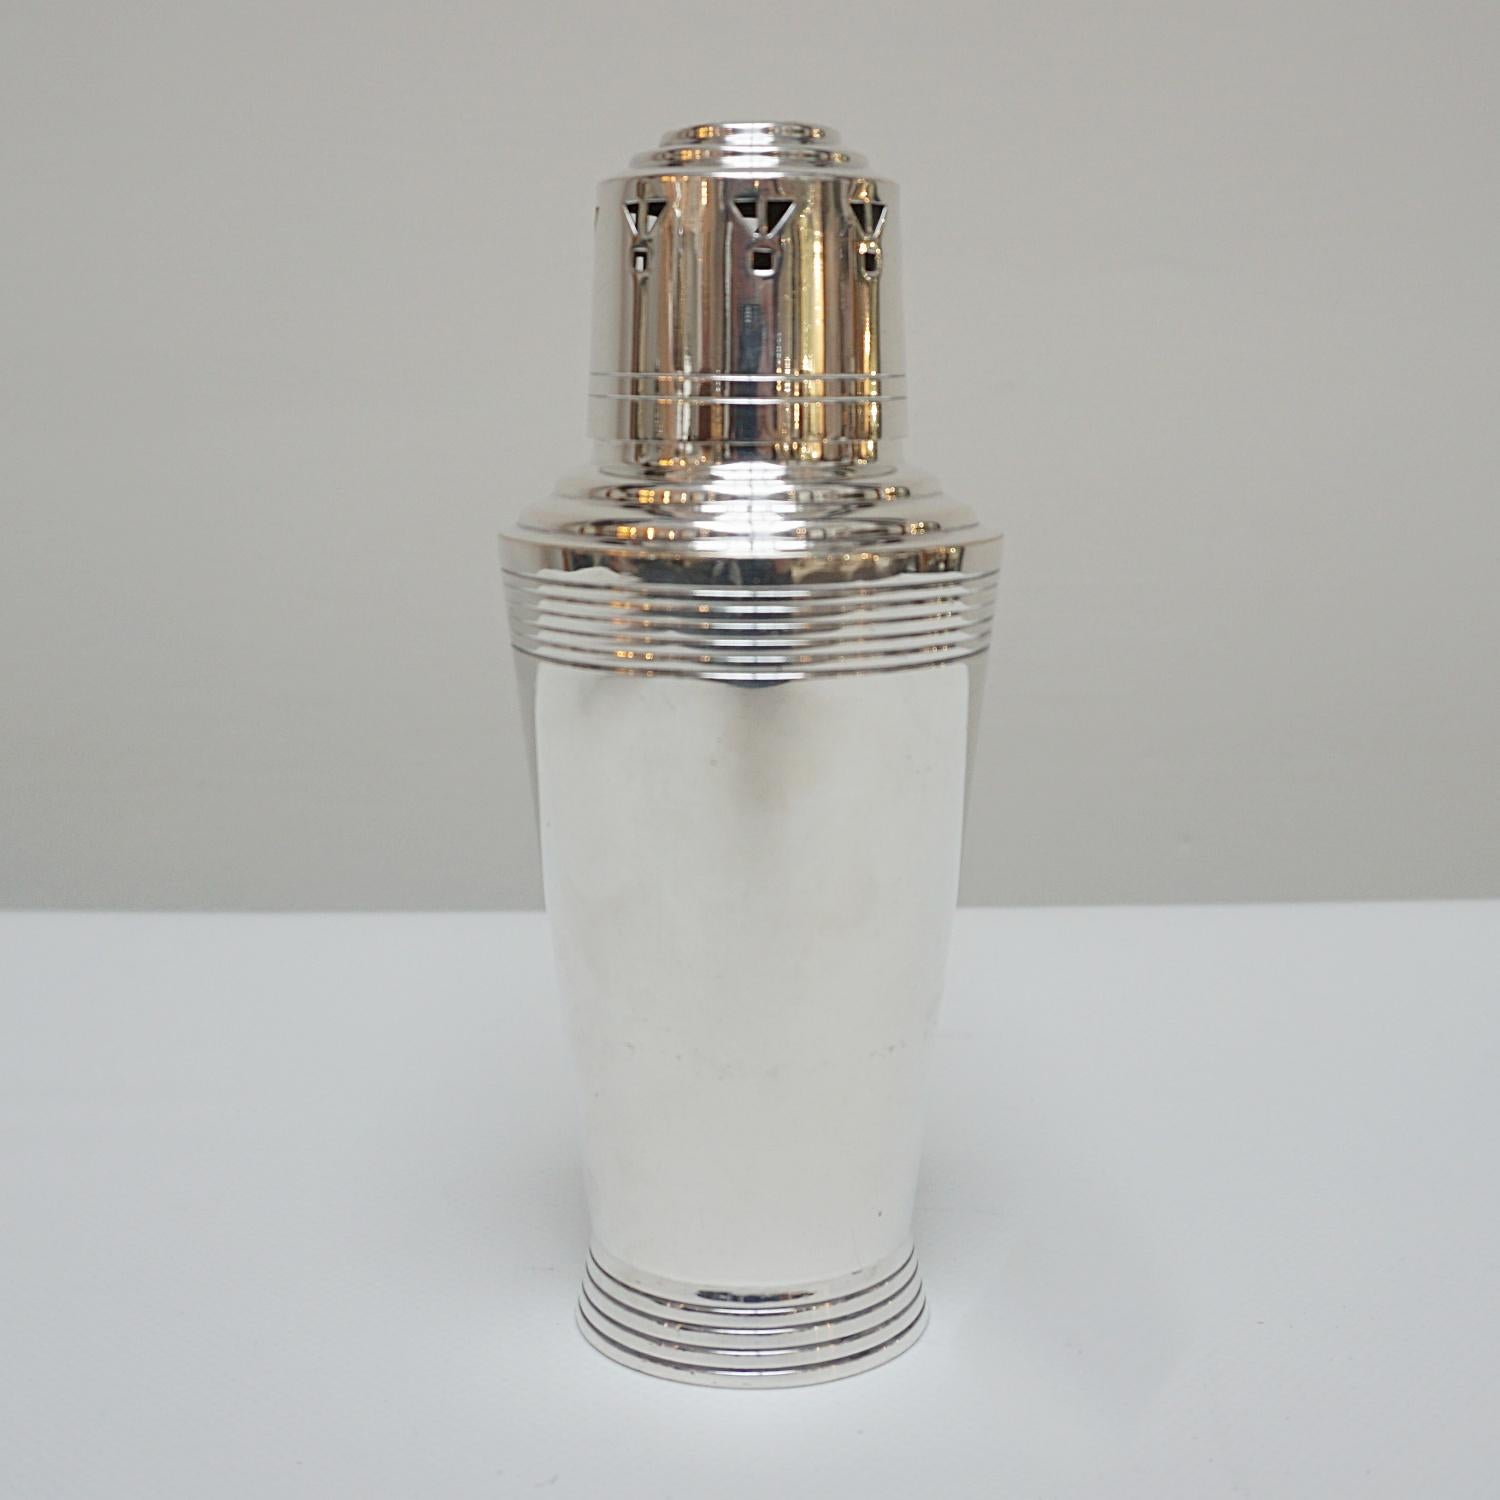 An Art Deco silver plated sugar sifter designed by Keith Murray for Mappin & Webb. 

Dimensions: H 17cm D 5.5cm 

Origin: English

Date: circa 1935

Item Number: 1003236.